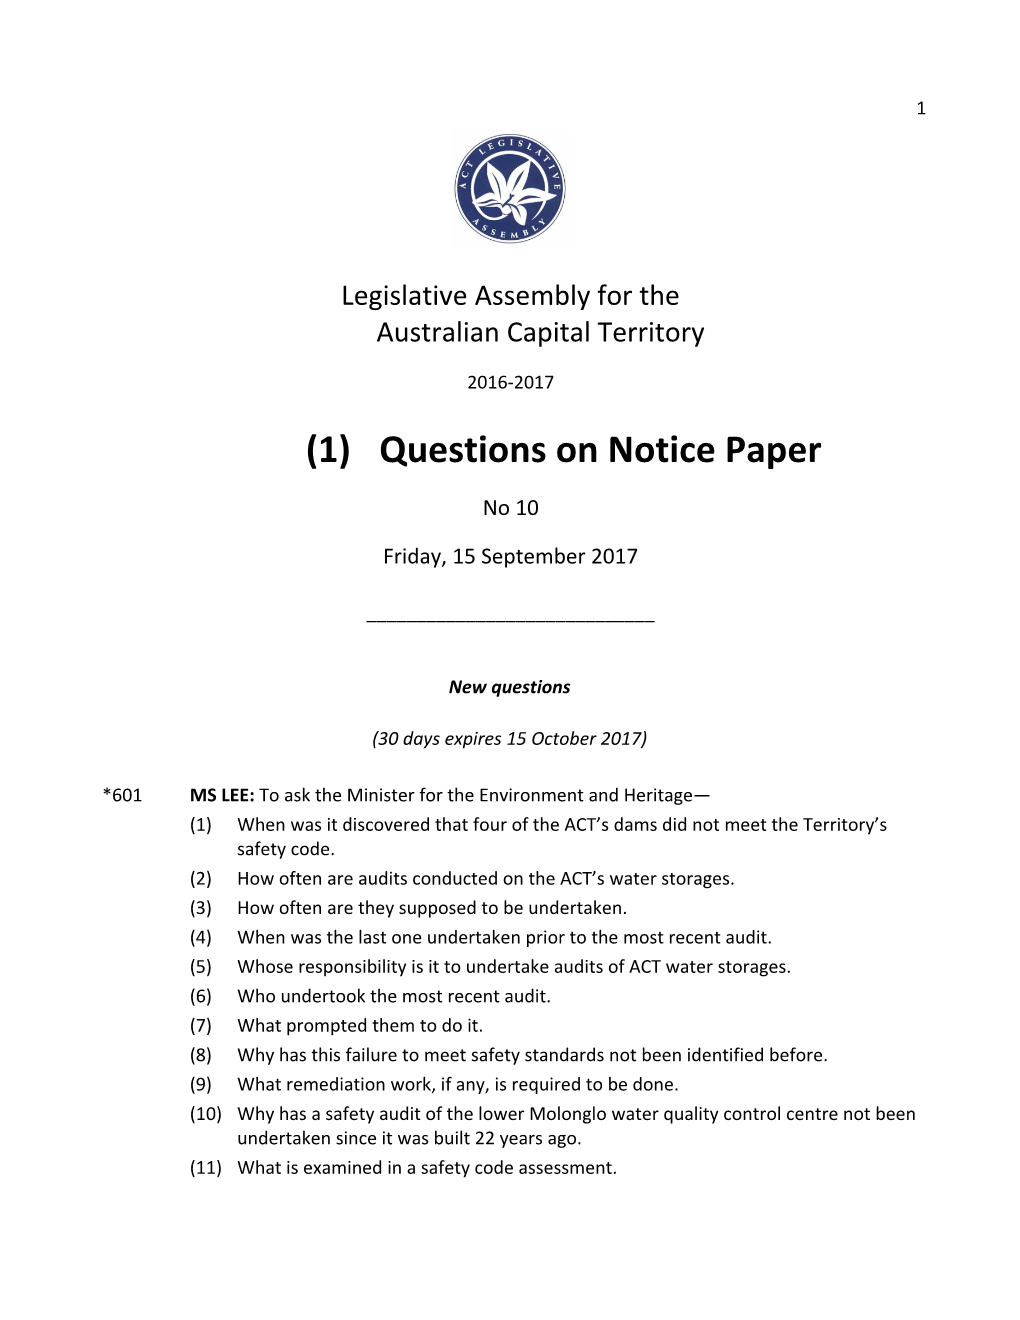 Questions on Notice Paper No 10 - Friday, 15 September 2017